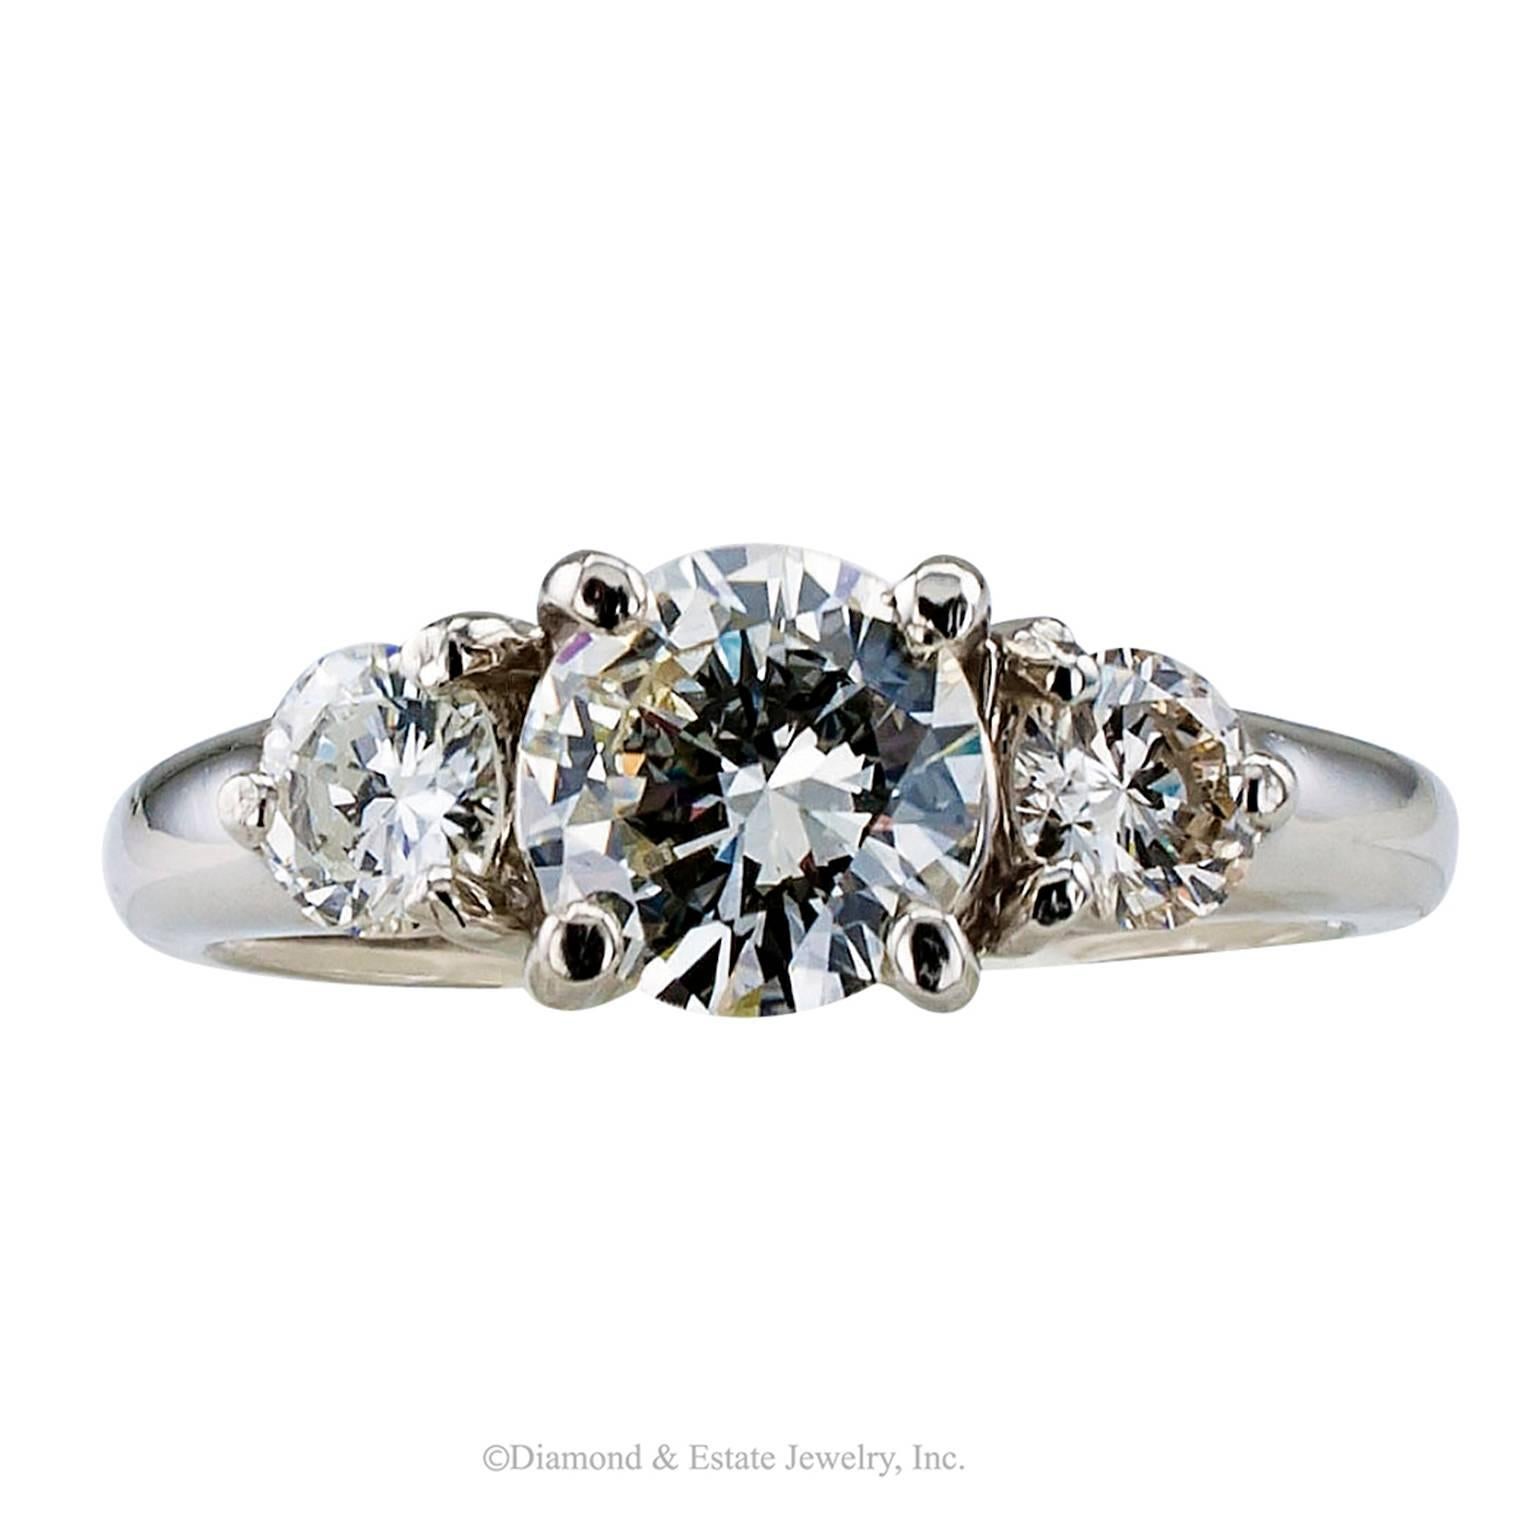 0.96 Carat Center Diamond Three-stone Engagement Ring

Three-stone 0.96 carat center diamond and platinum engagement ring.  One of the most endearing and traditional engagement ring styles, the three-stone diamond ring is king, at the top of the